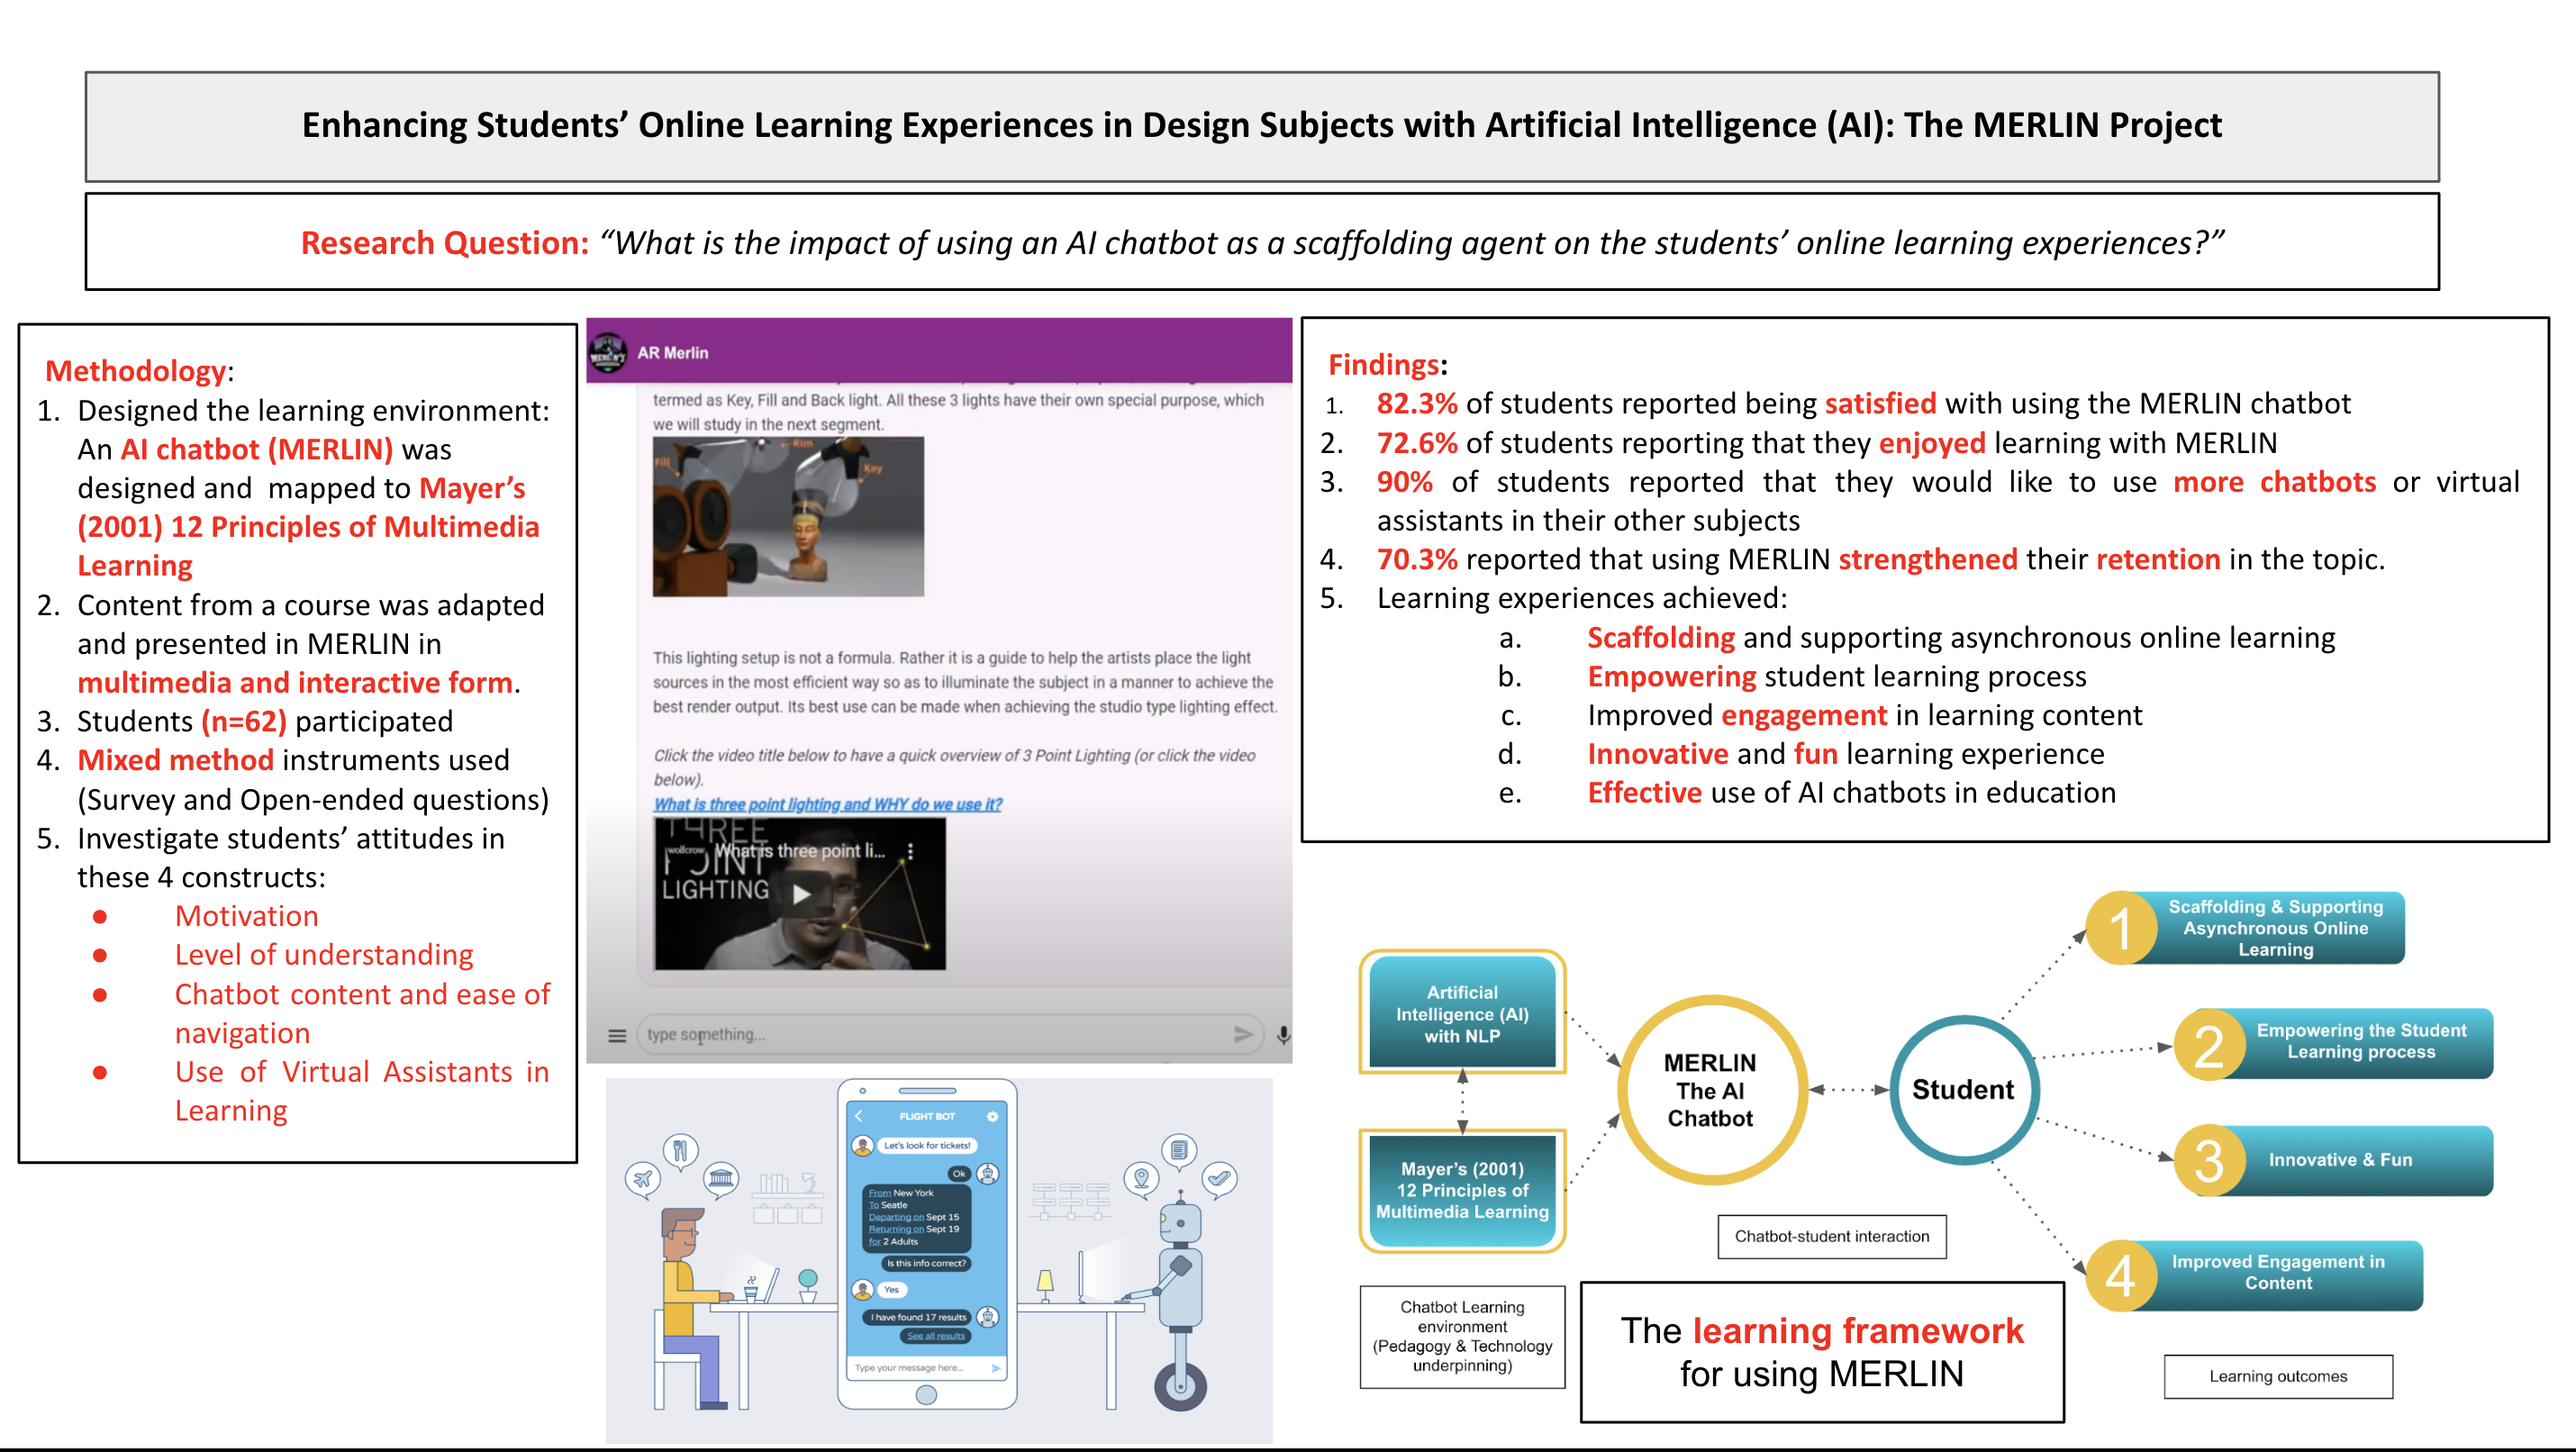 Enhancing Students’ Online Learning Experiences with Artificial Intelligence (AI): The MERLIN Project